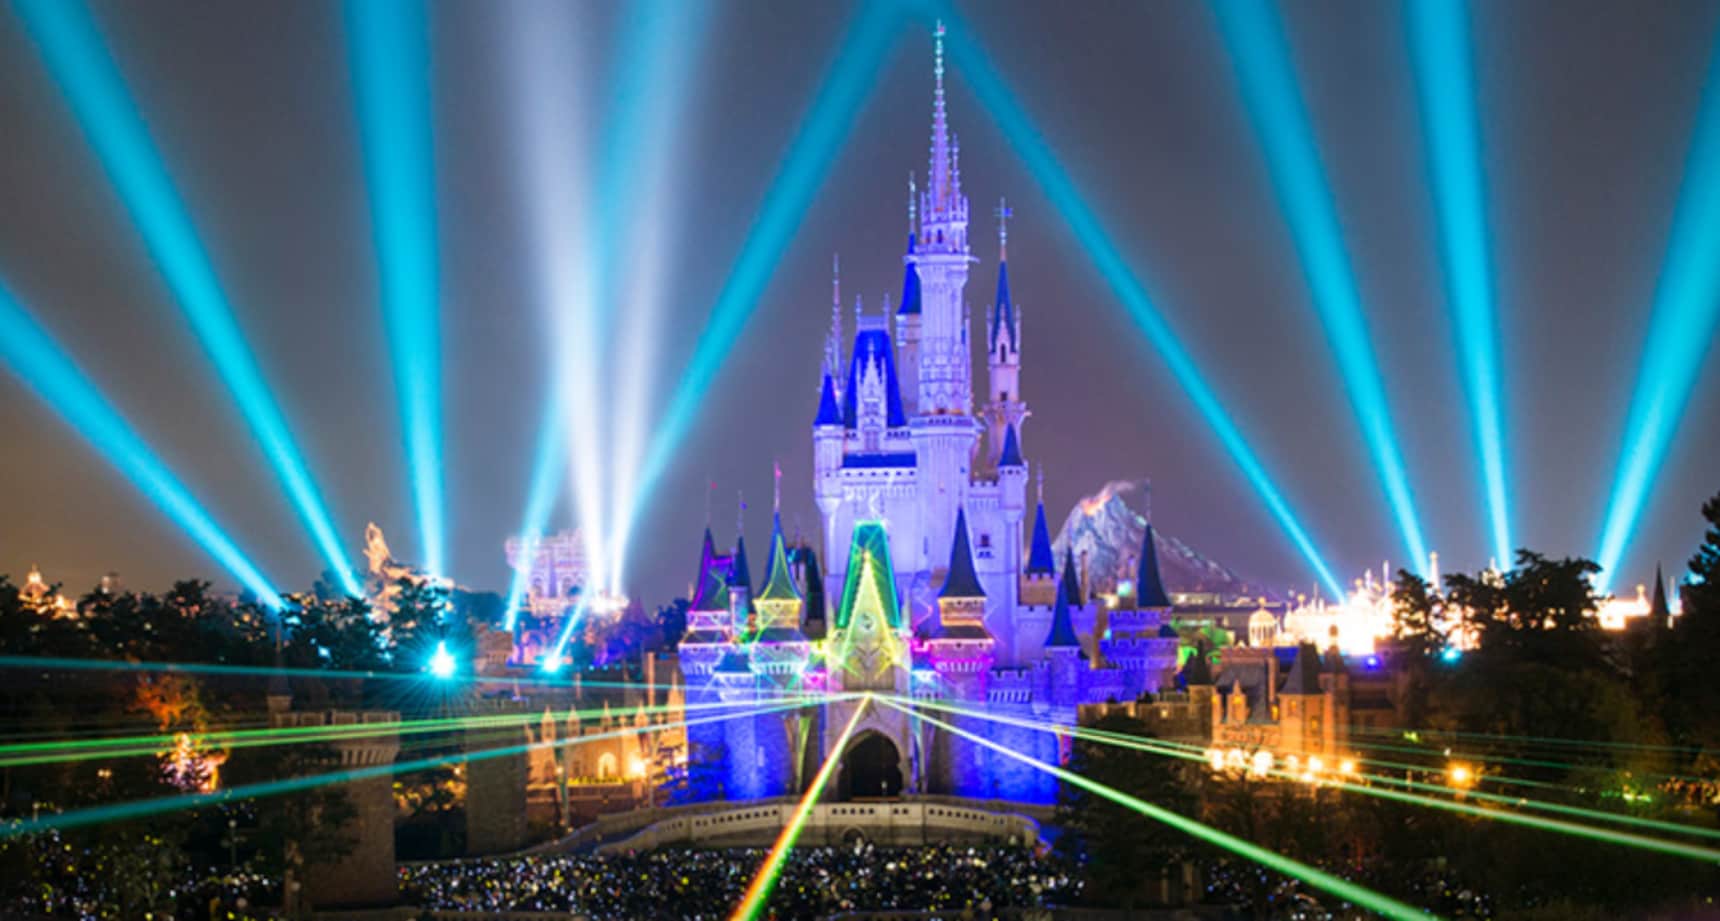 Ring in the New Year at Tokyo Disneyland! All About Japan